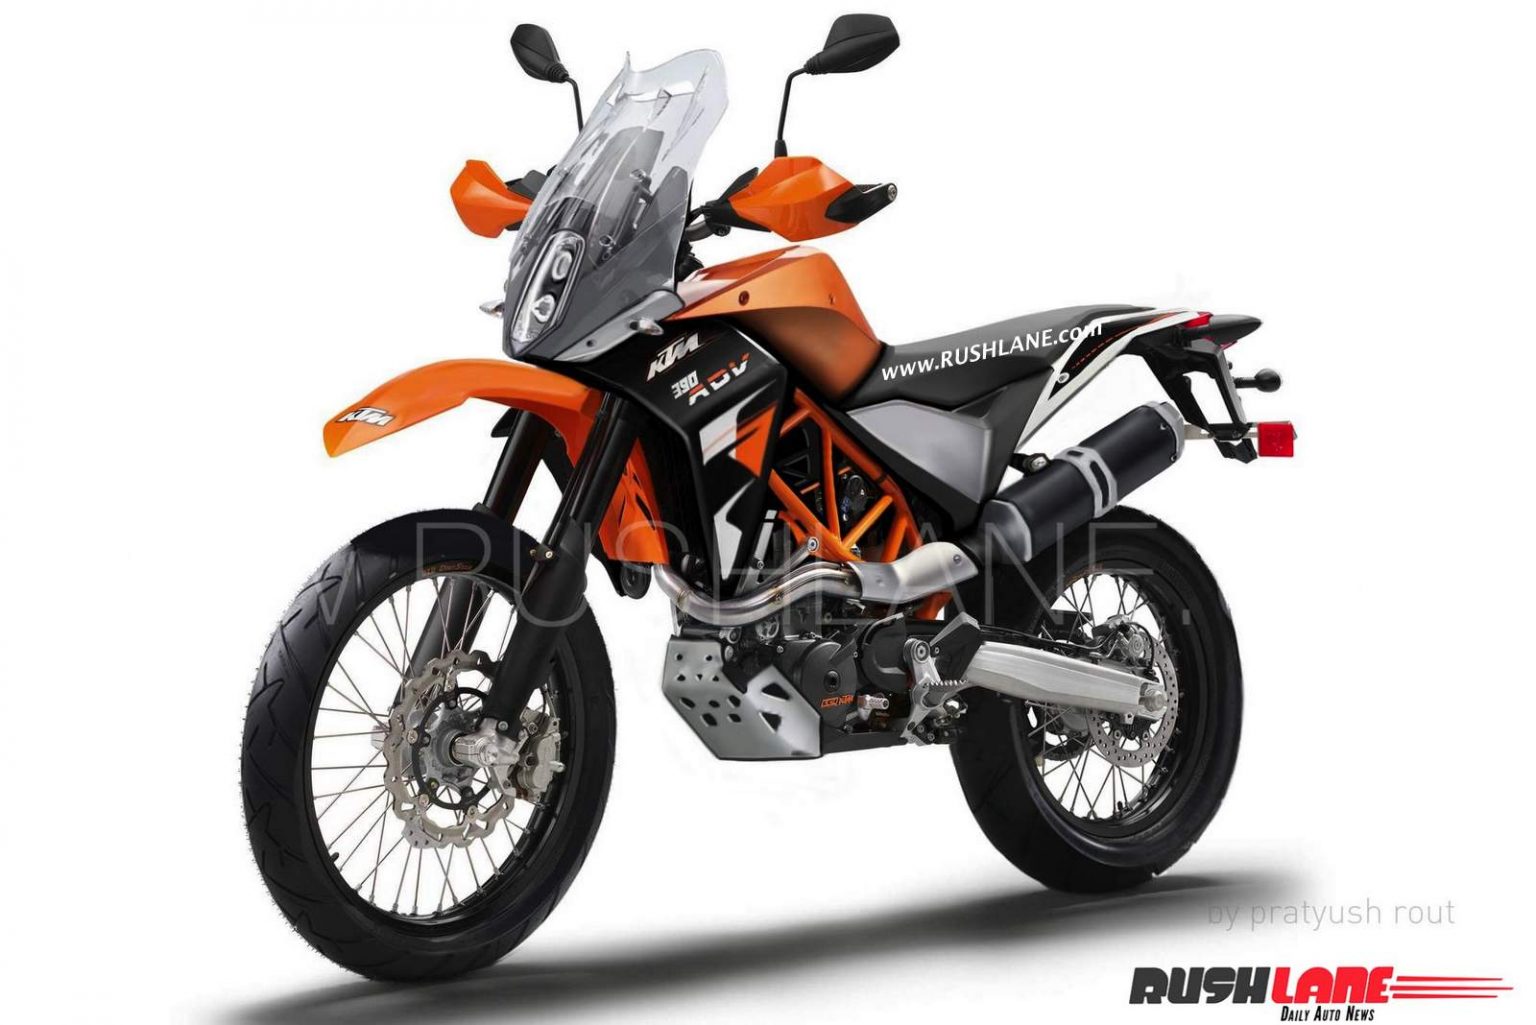 New KTM 390 Adventure with off-road tyres spied ahead of launch